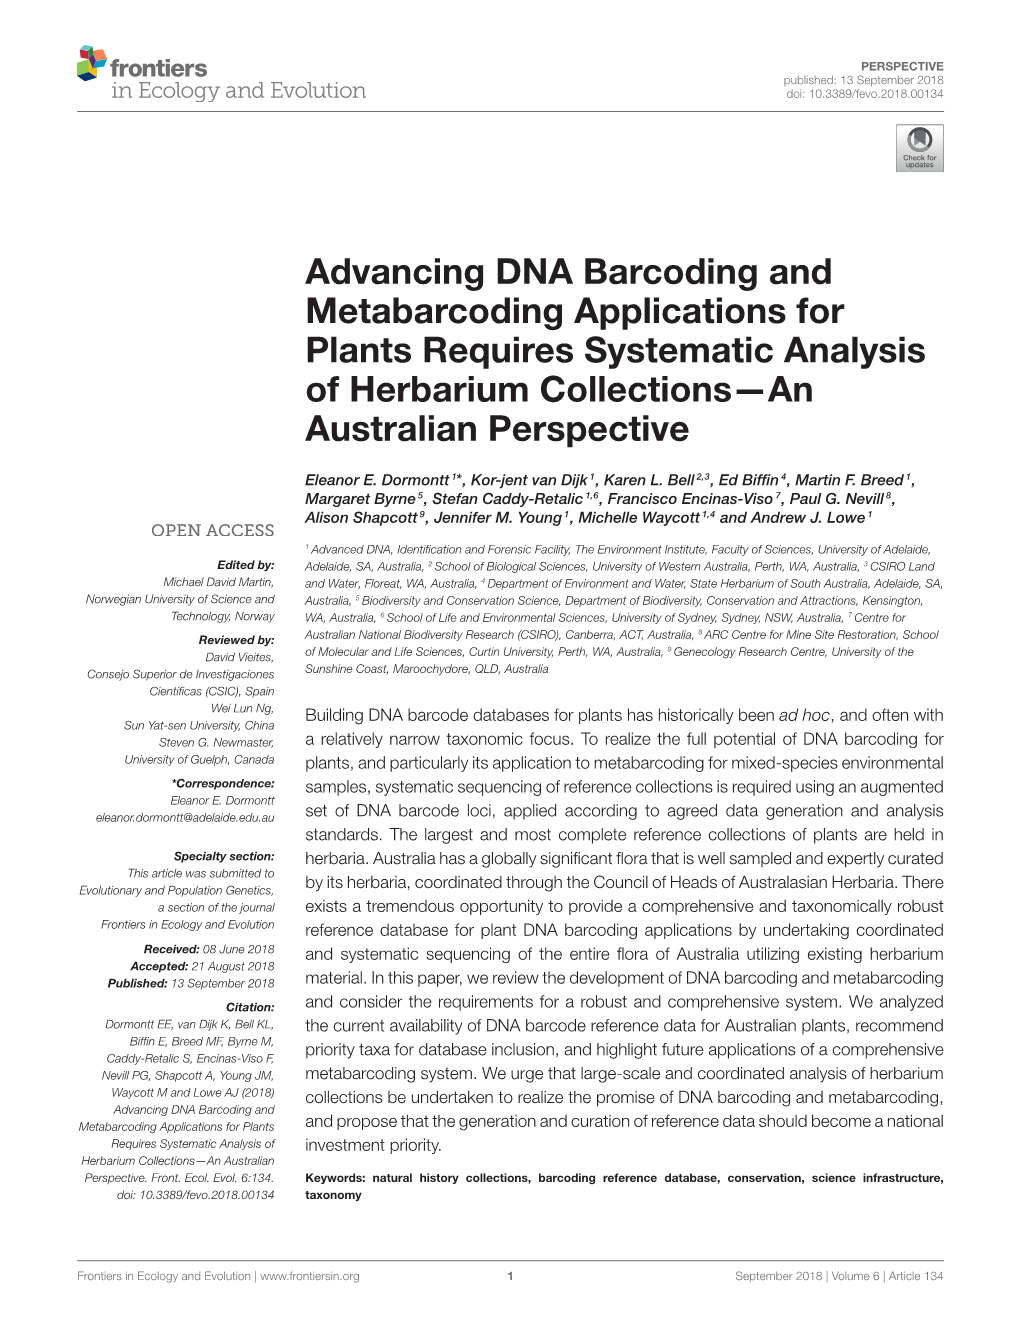 Advancing DNA Barcoding and Metabarcoding Applications for Plants Requires Systematic Analysis of Herbarium Collections—An Australian Perspective